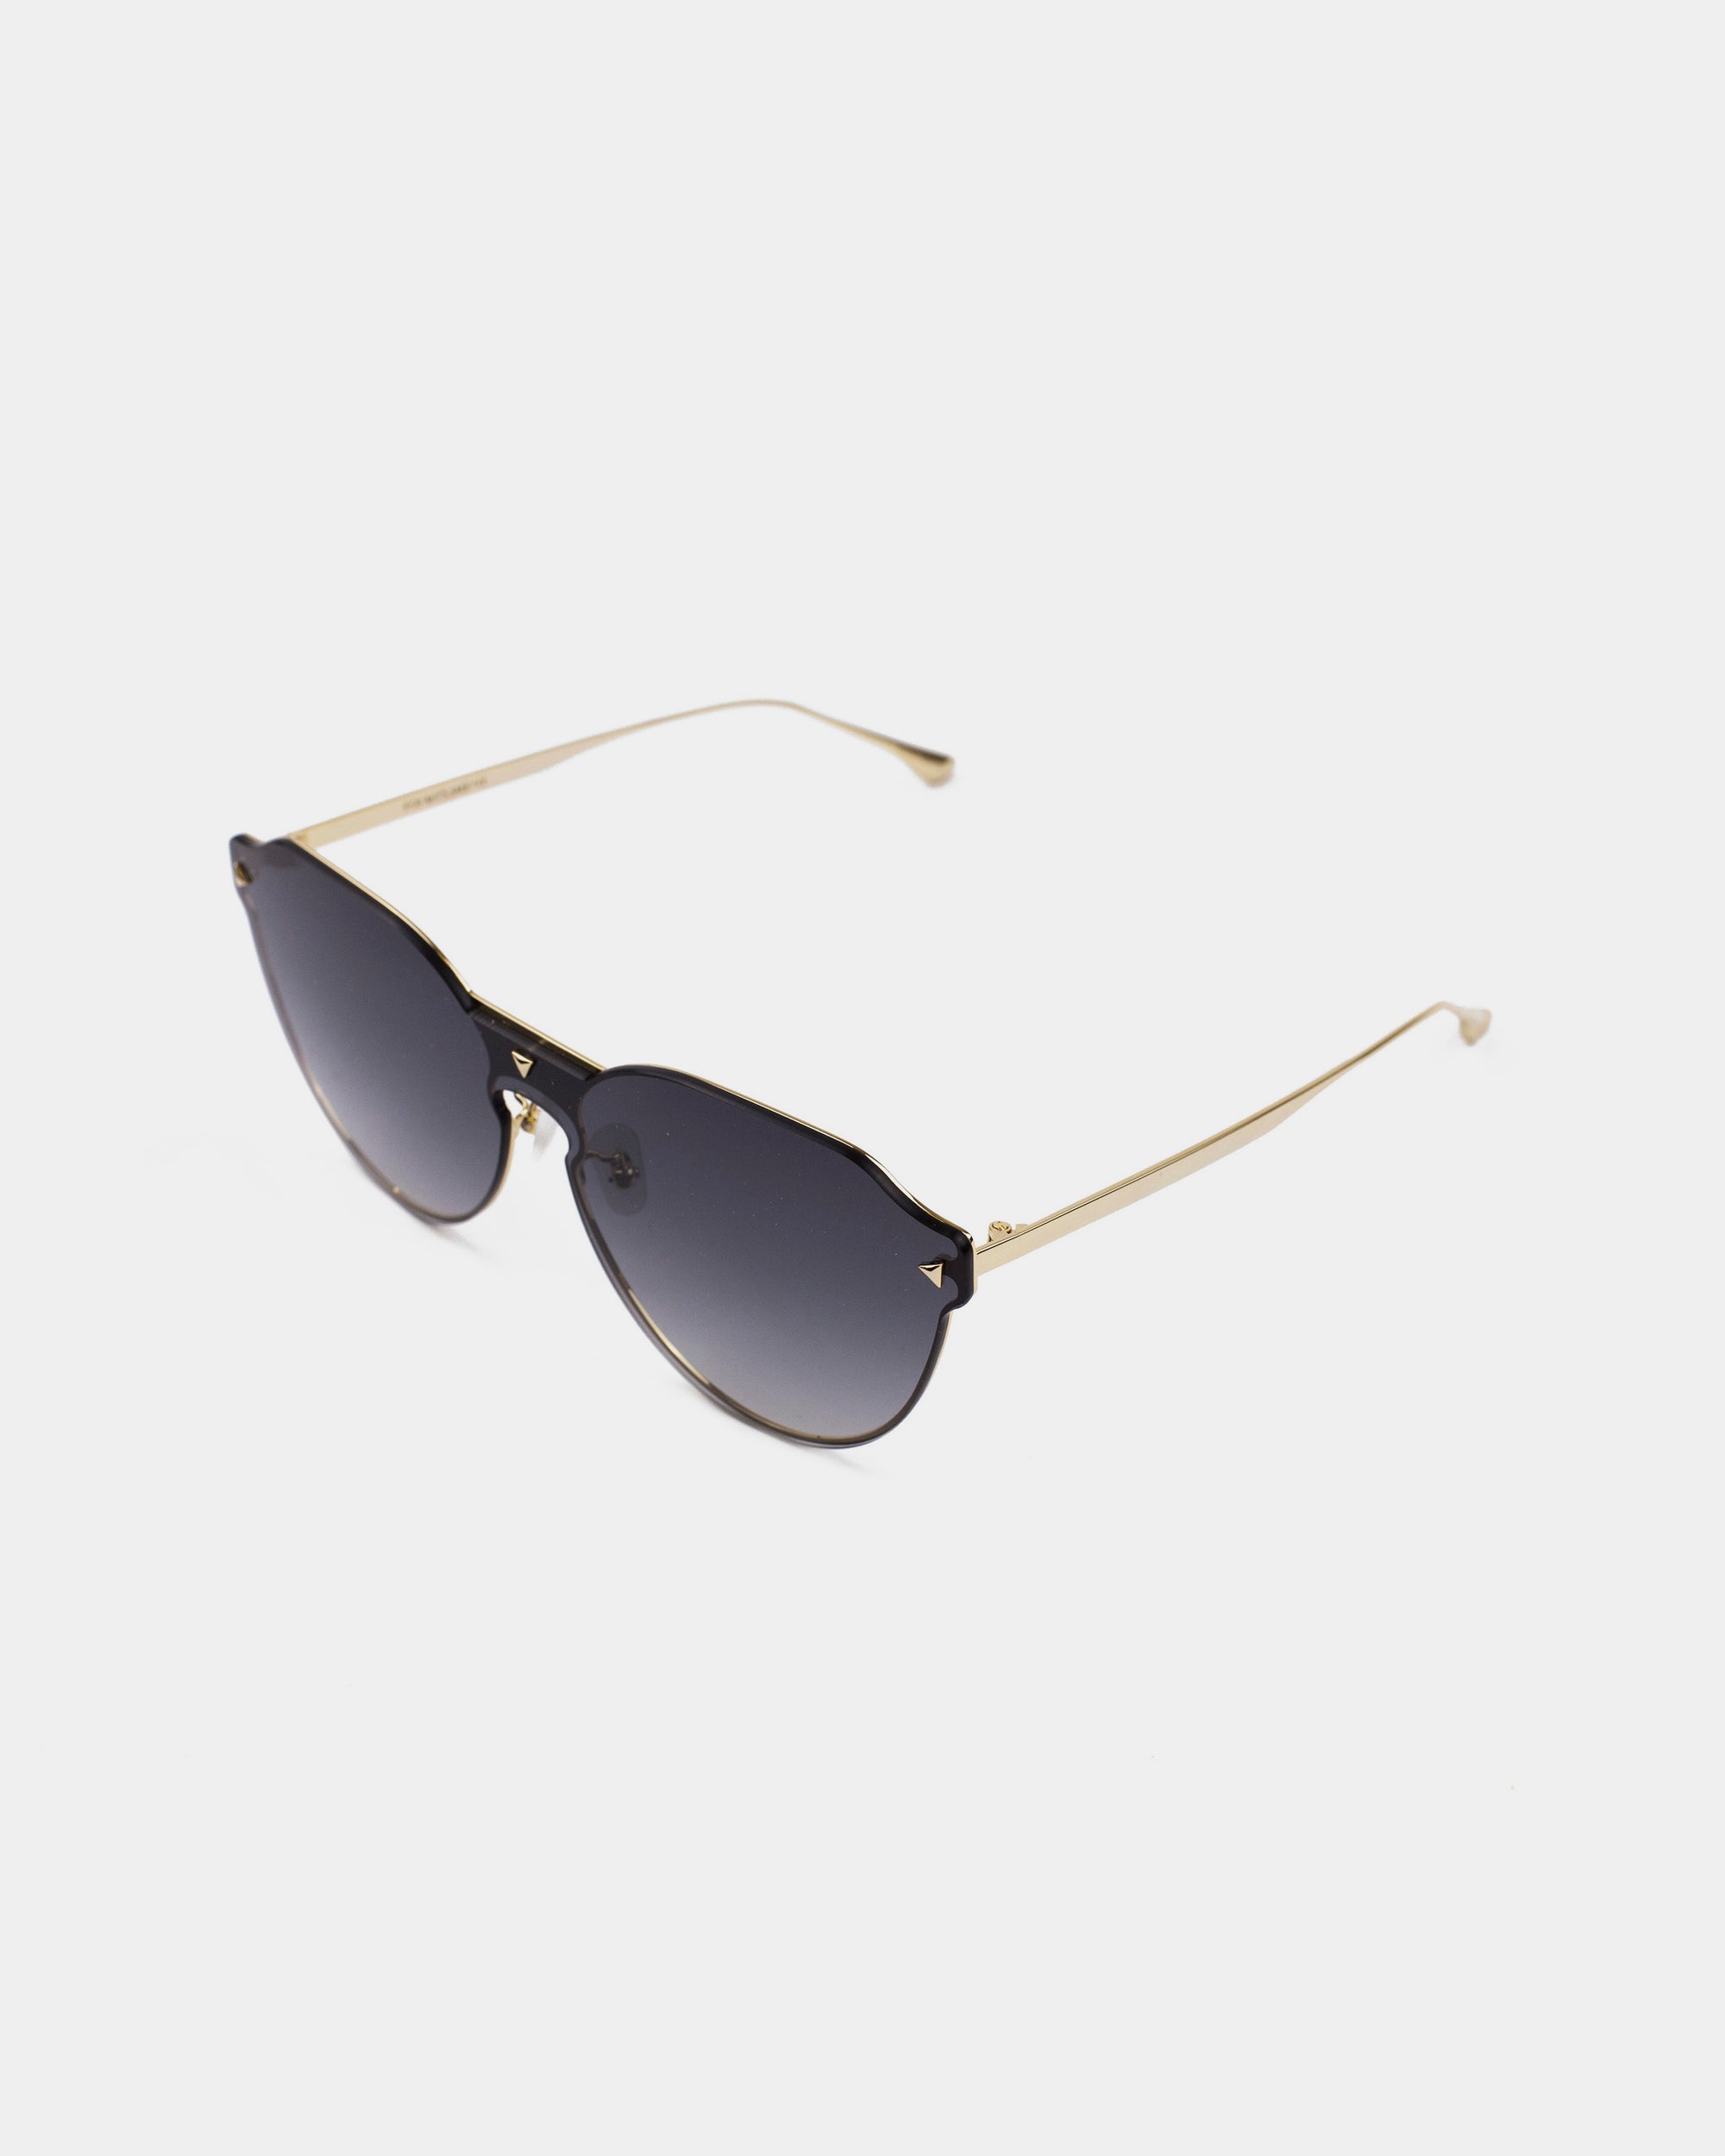 A pair of stylish sunglasses with black round nylon lenses offering UV protection, and thin, 18-karat gold-plated frames, angled slightly. The background is plain white, highlighting the sleek design and minimalist aesthetic of the Error 404 by For Art&#39;s Sake®.